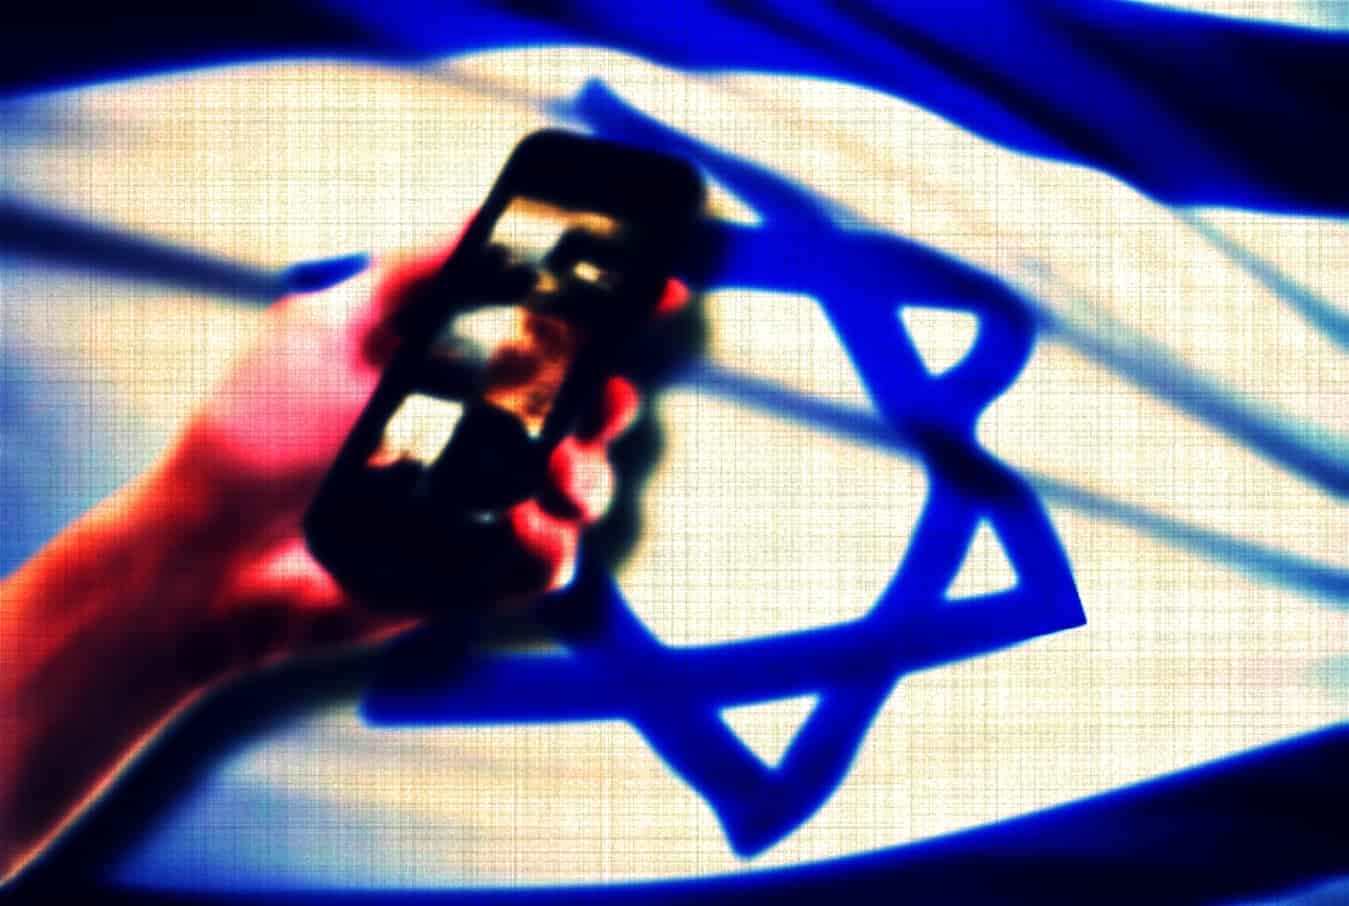 iPhones of 9 State Dept officials hijacked by Israeli firm's spyware